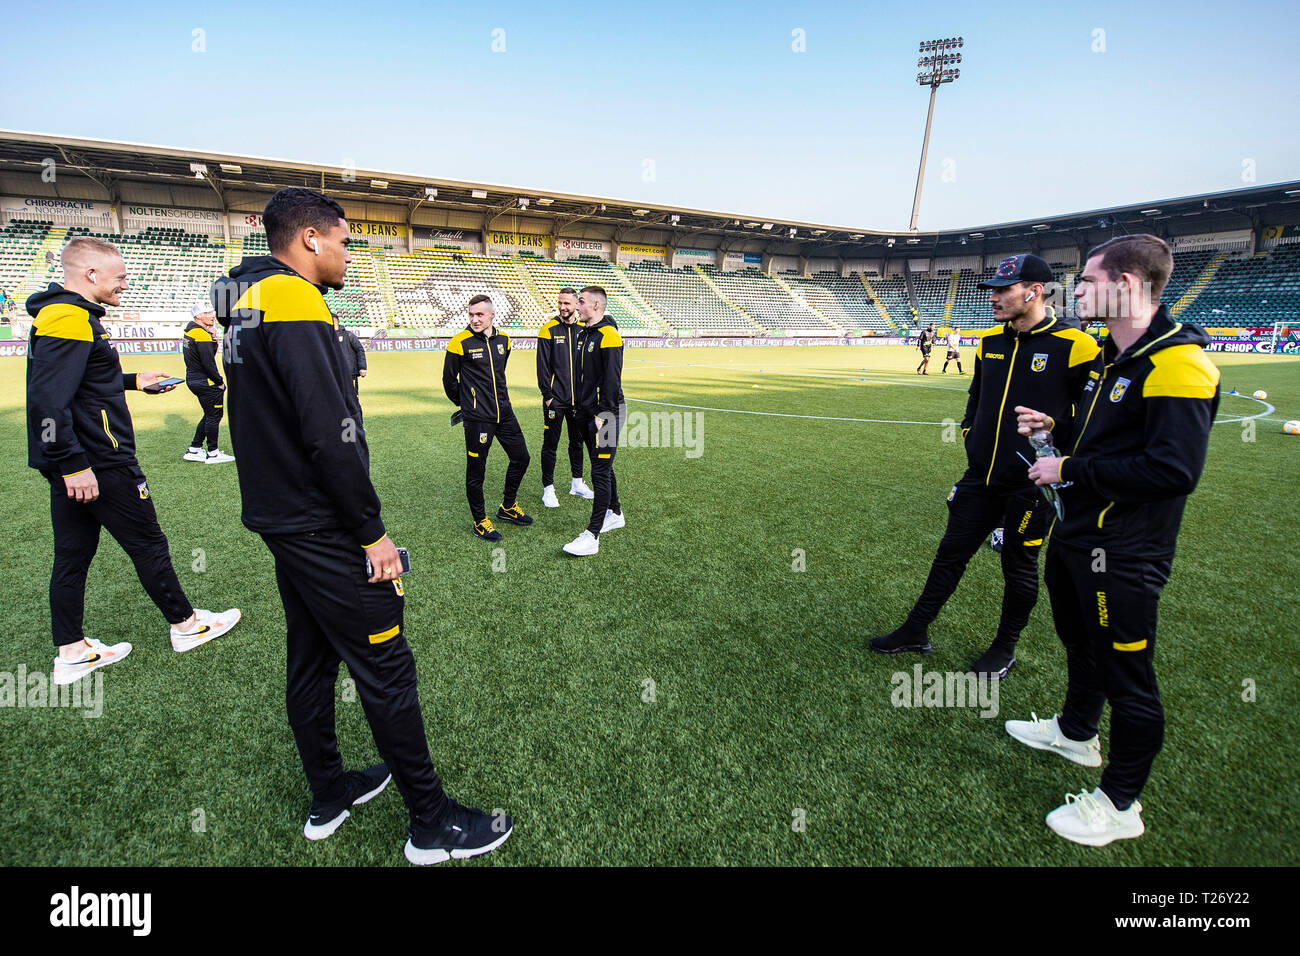 DEN HAAG, 30-03-2019, Cars Jeans Stadion, season 2018 / 2019, Vitesse  players inspecting the pitch before the match ADO Den Haag- Vitesse Credit:  Pro Shots/Alamy Live News Credit: Pro Shots/Alamy Live News